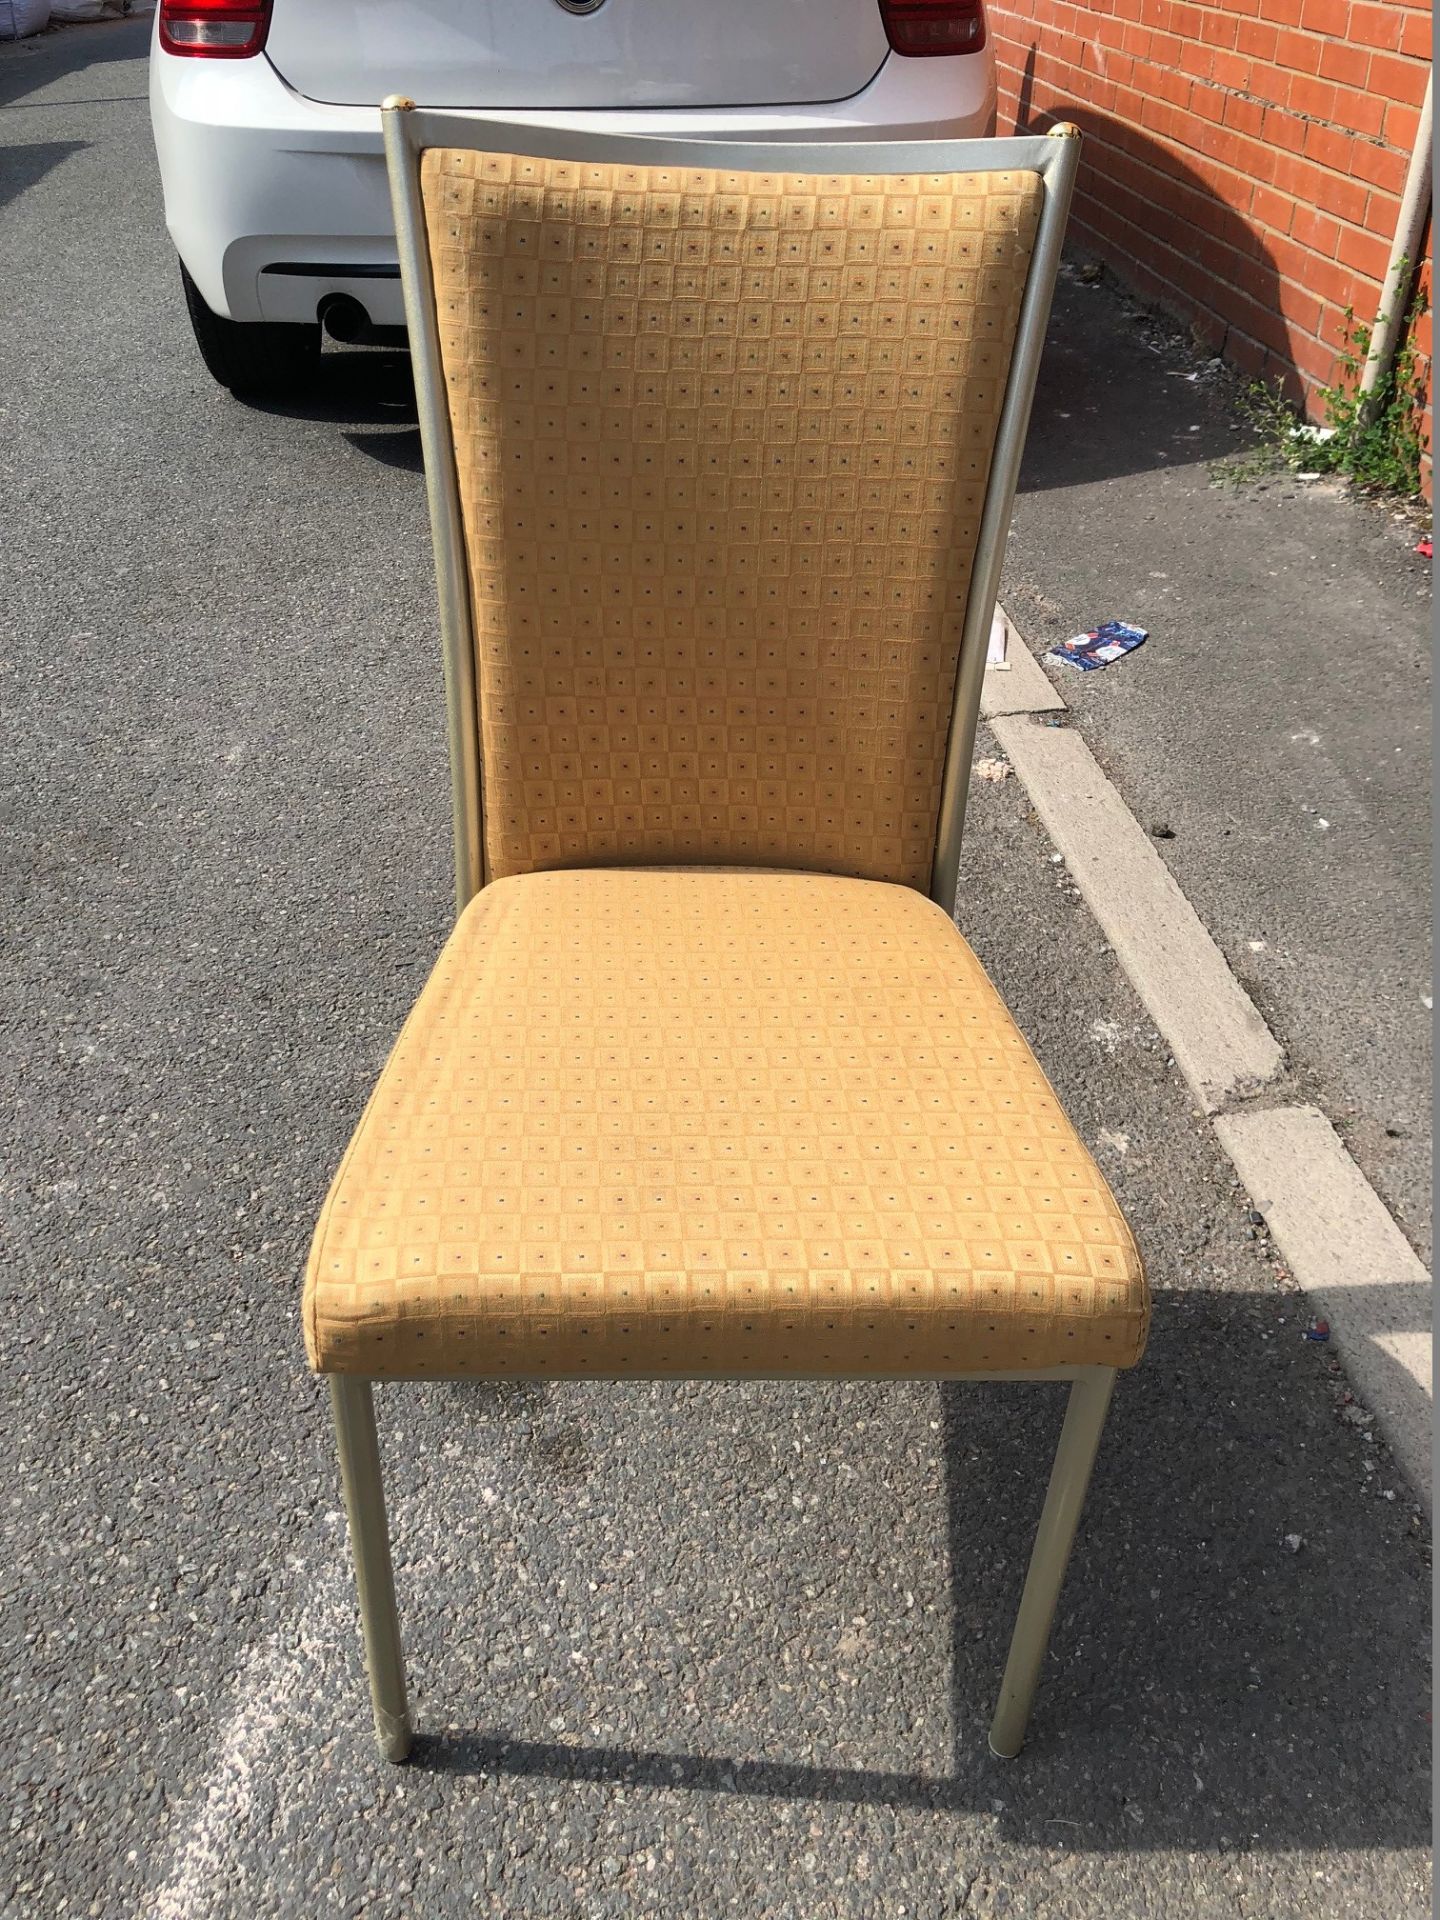 5 x Padded Banquet Chairs - High Quality Chairs Ideal For Restaurant/Social Clubs/Events (Brand